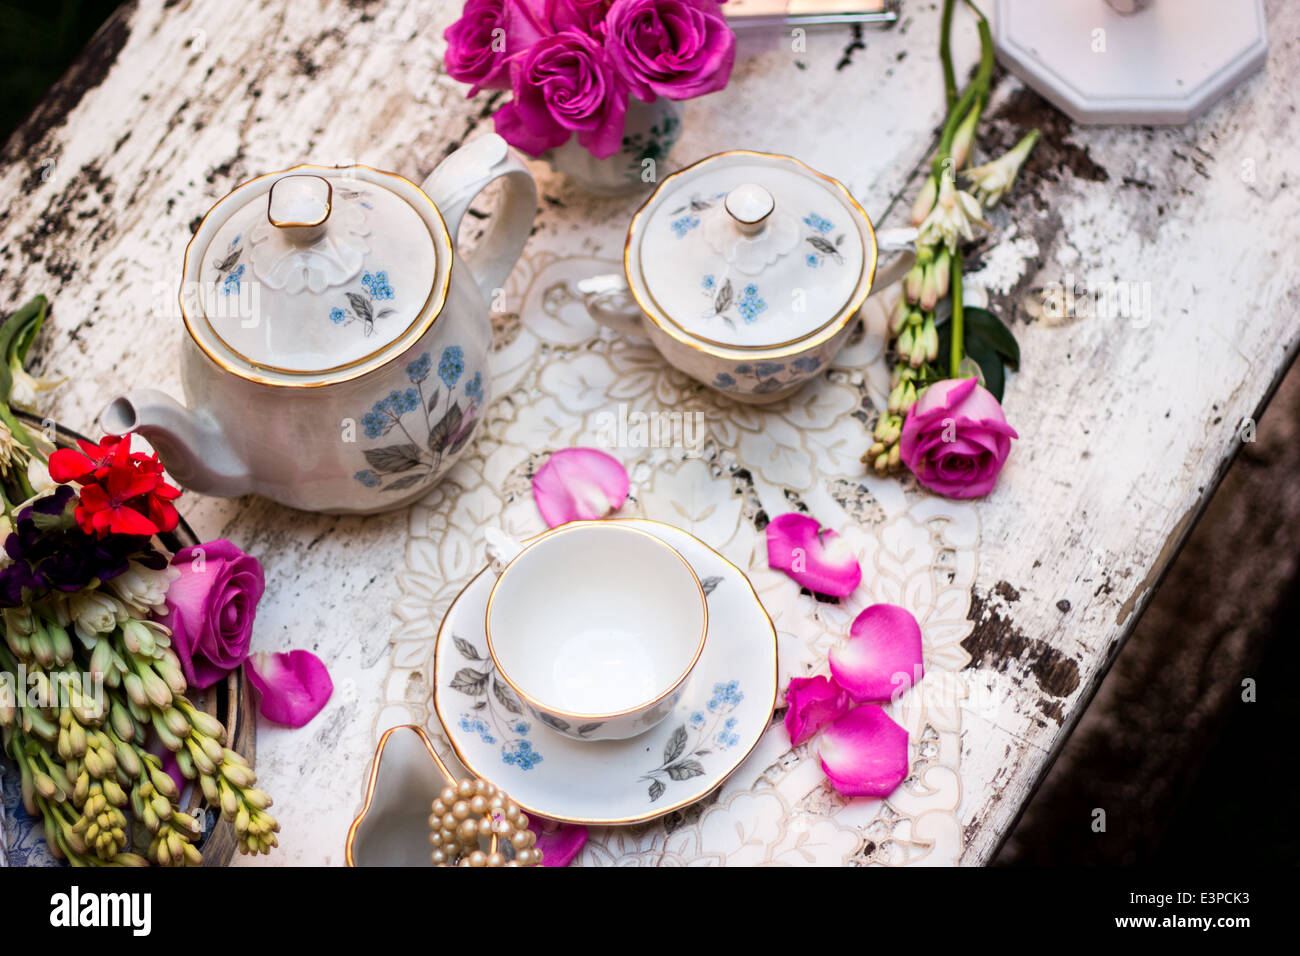 Old fashioned tea set in the garden with roses and petals Stock Photo